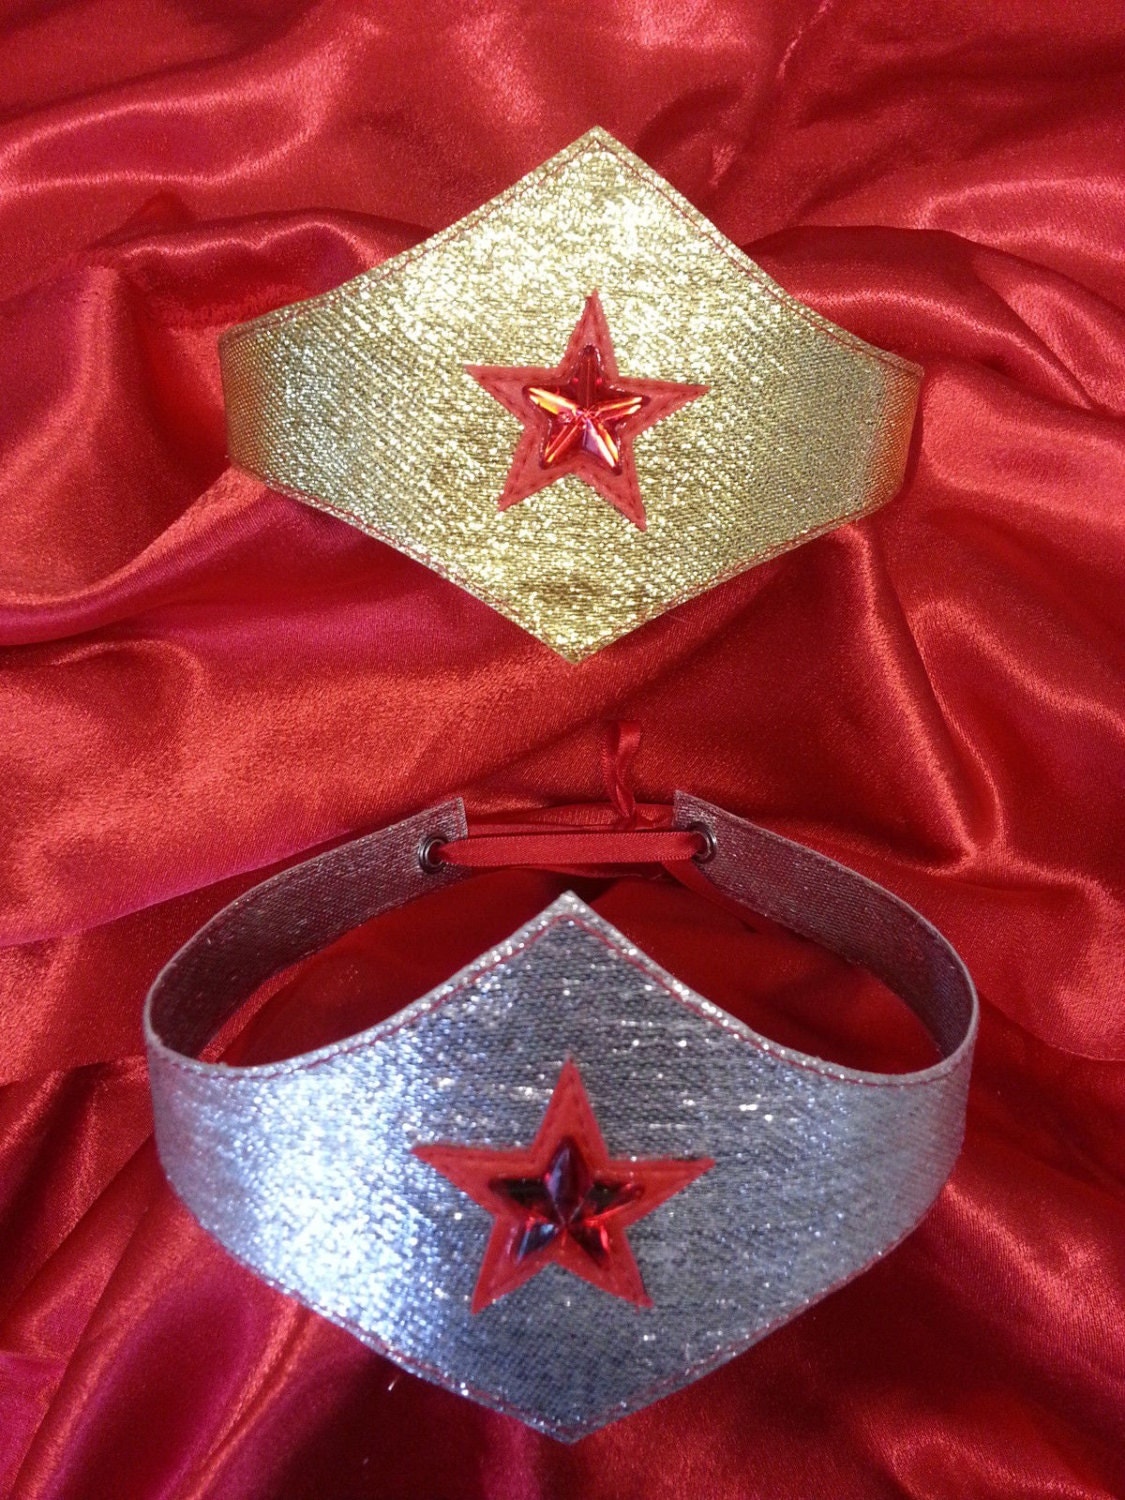 Download wonder woman gold or silver fabric double pointed TIARA headband,